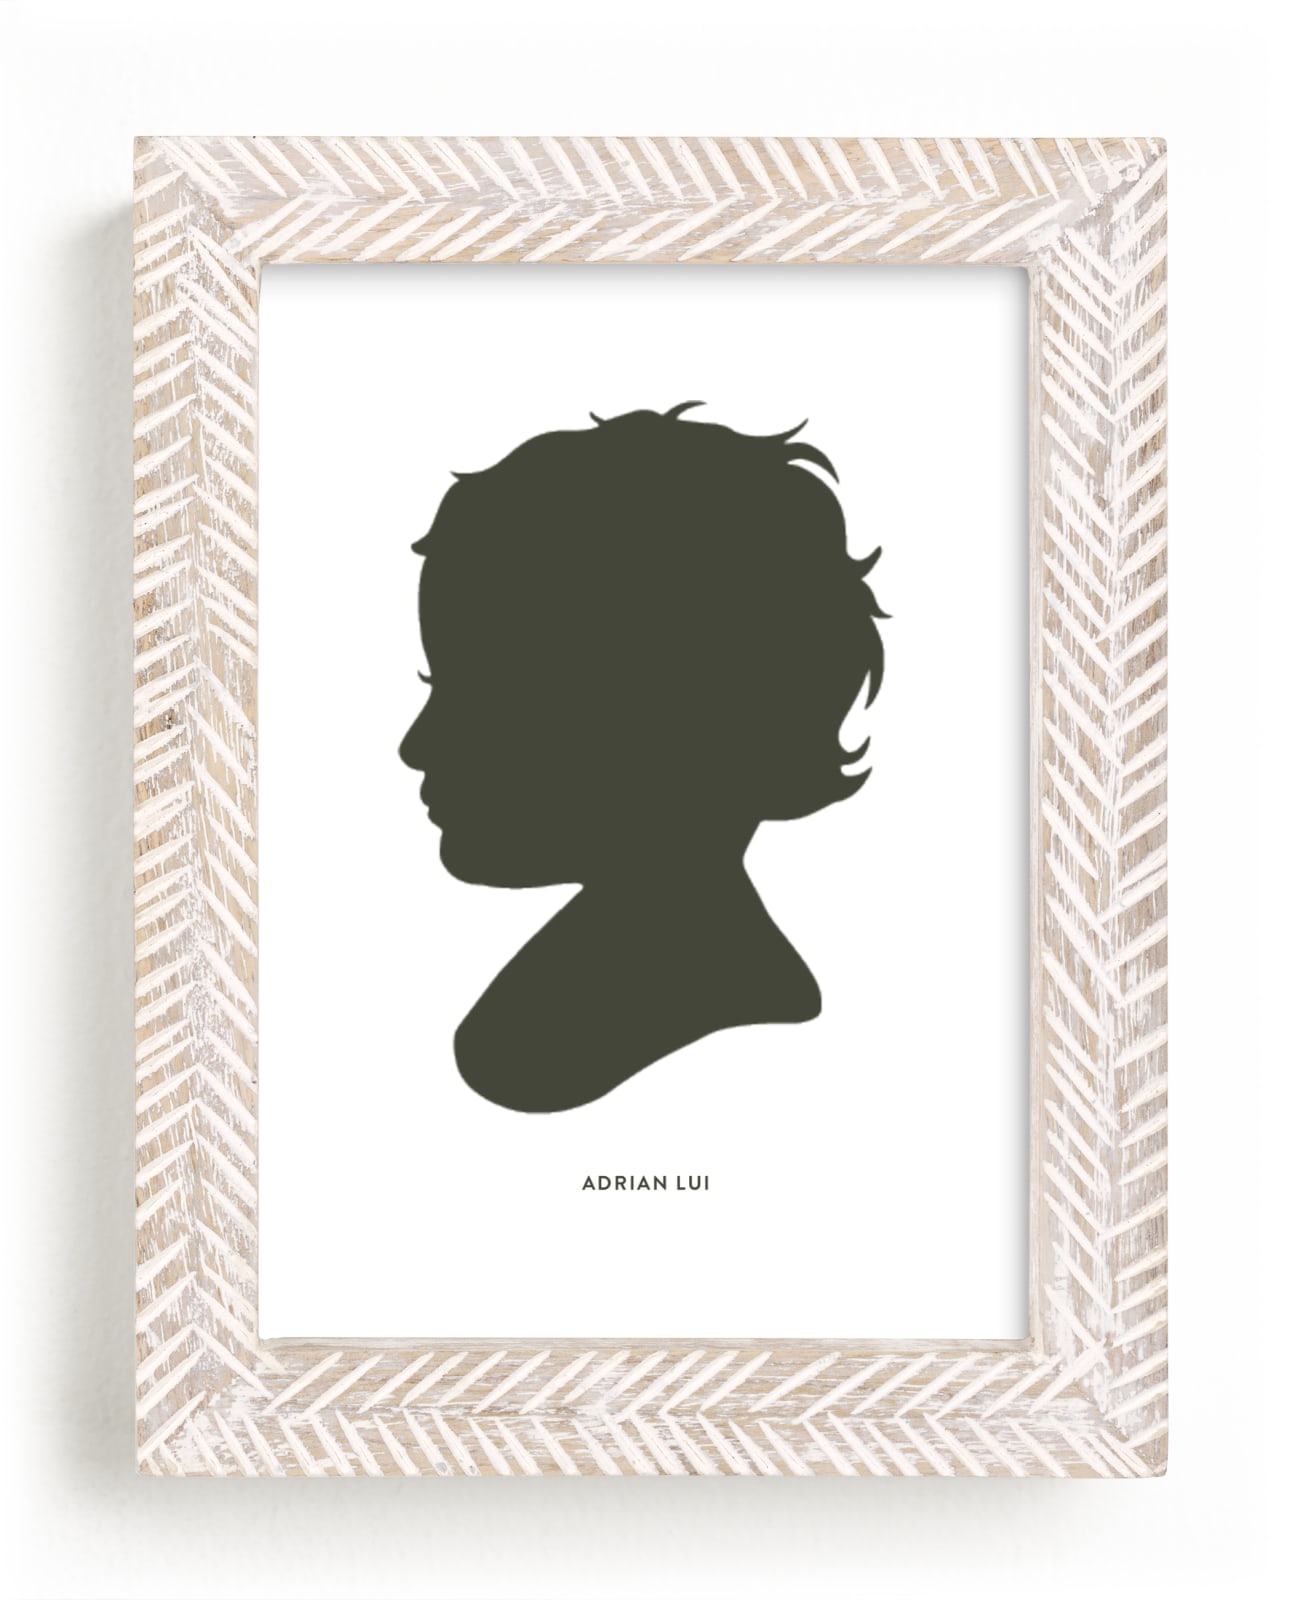 This is a green silhouette art by Minted called Custom Silhouette Art.